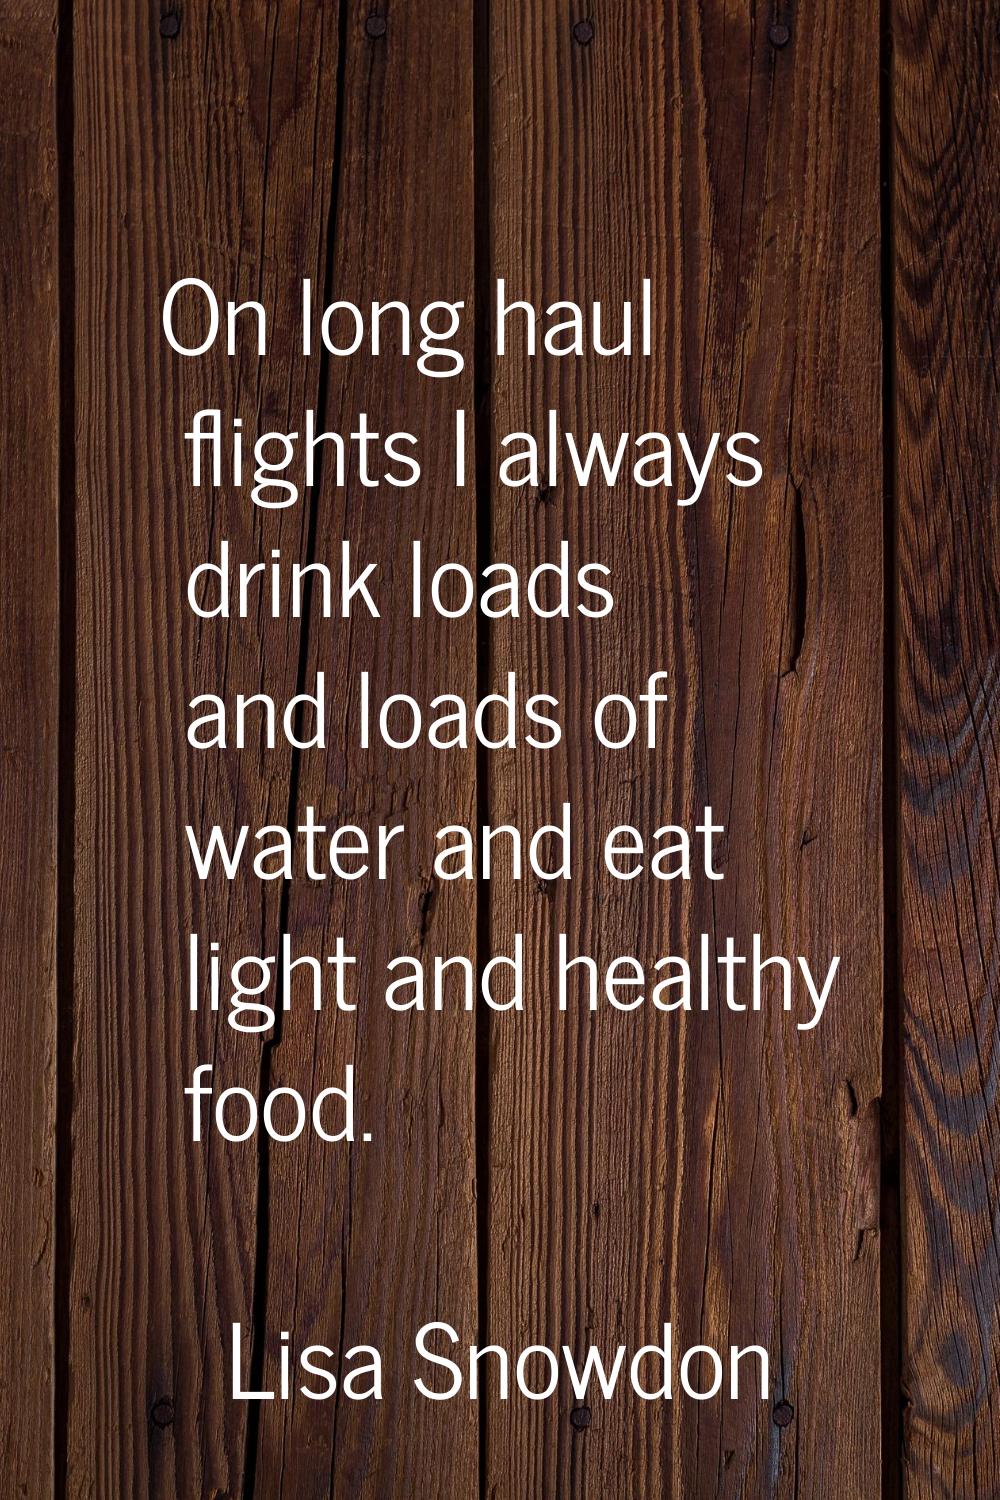 On long haul flights I always drink loads and loads of water and eat light and healthy food.